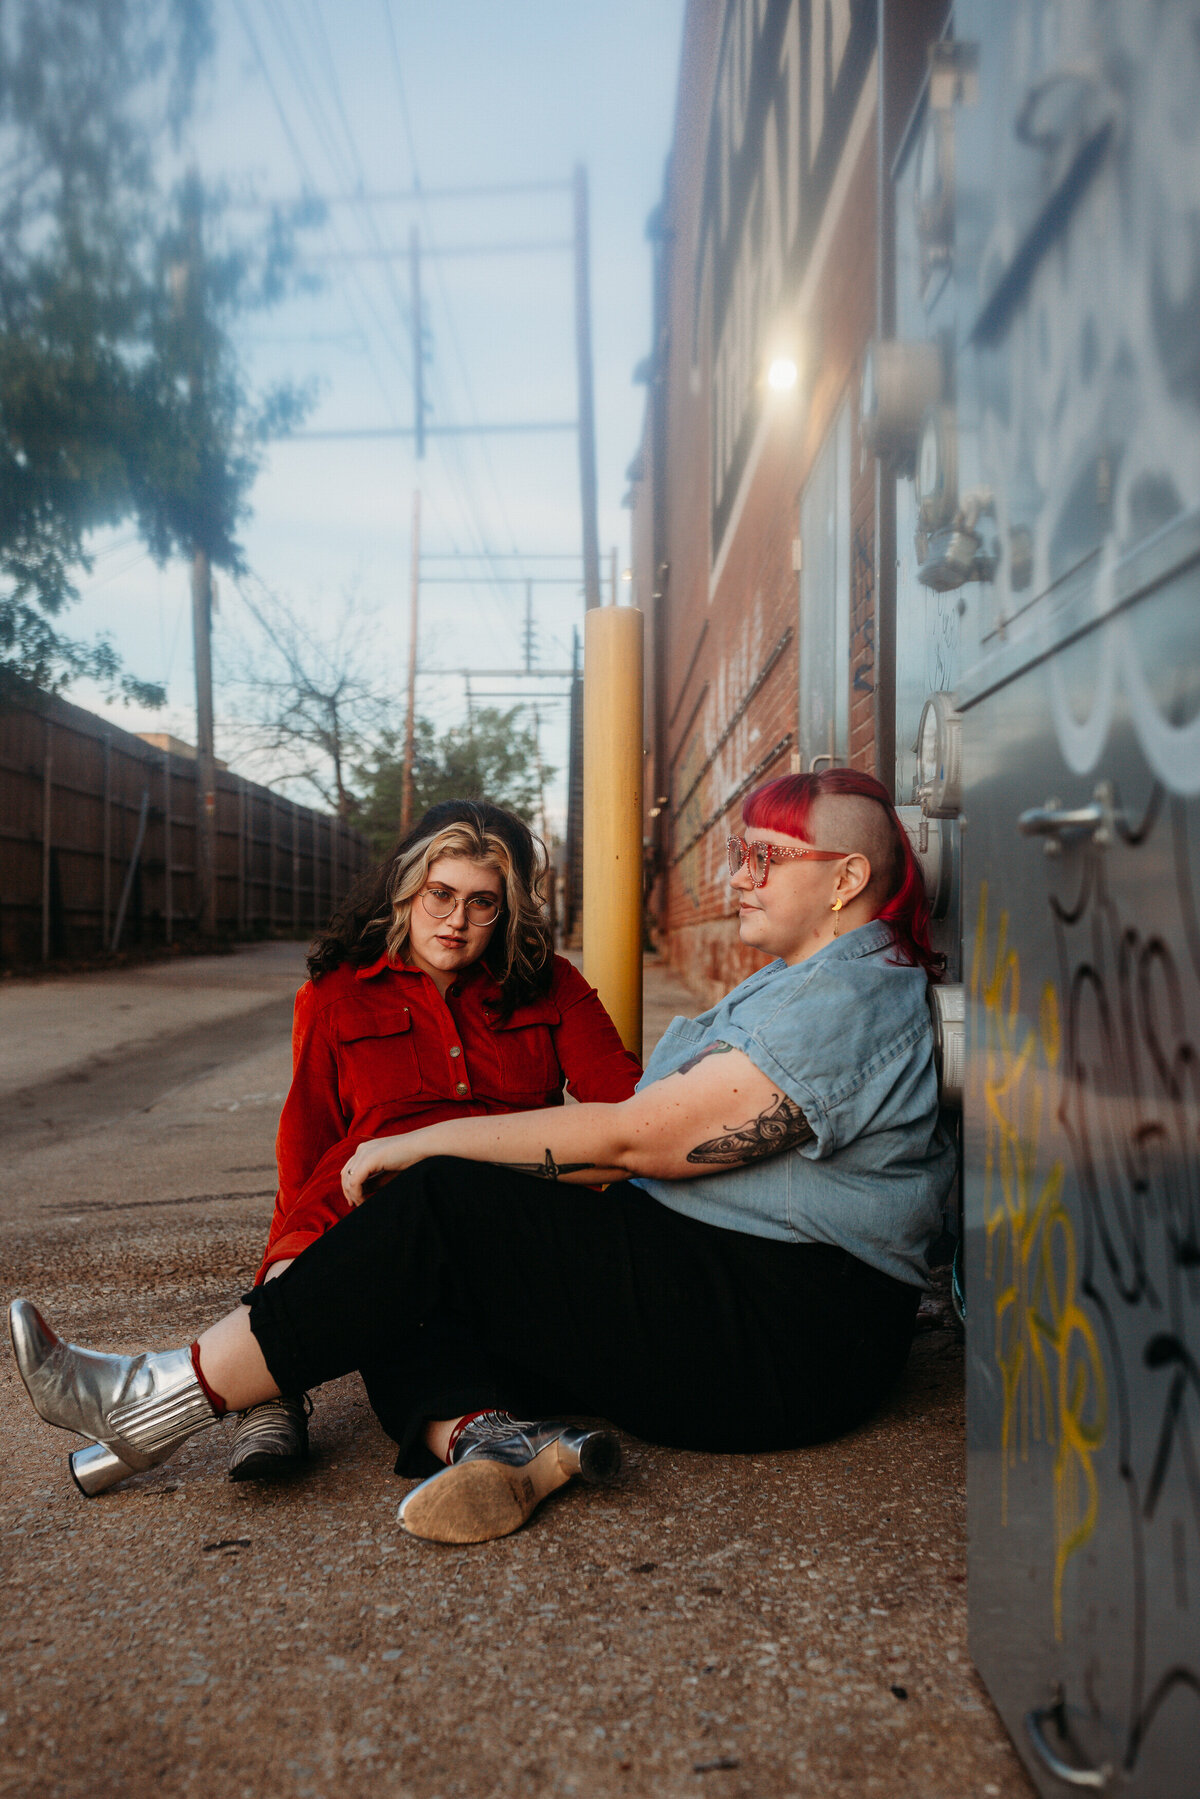 Two individuals seated against an urban backdrop with graffiti, conveying a relaxed and cool demeanor in their casual wear